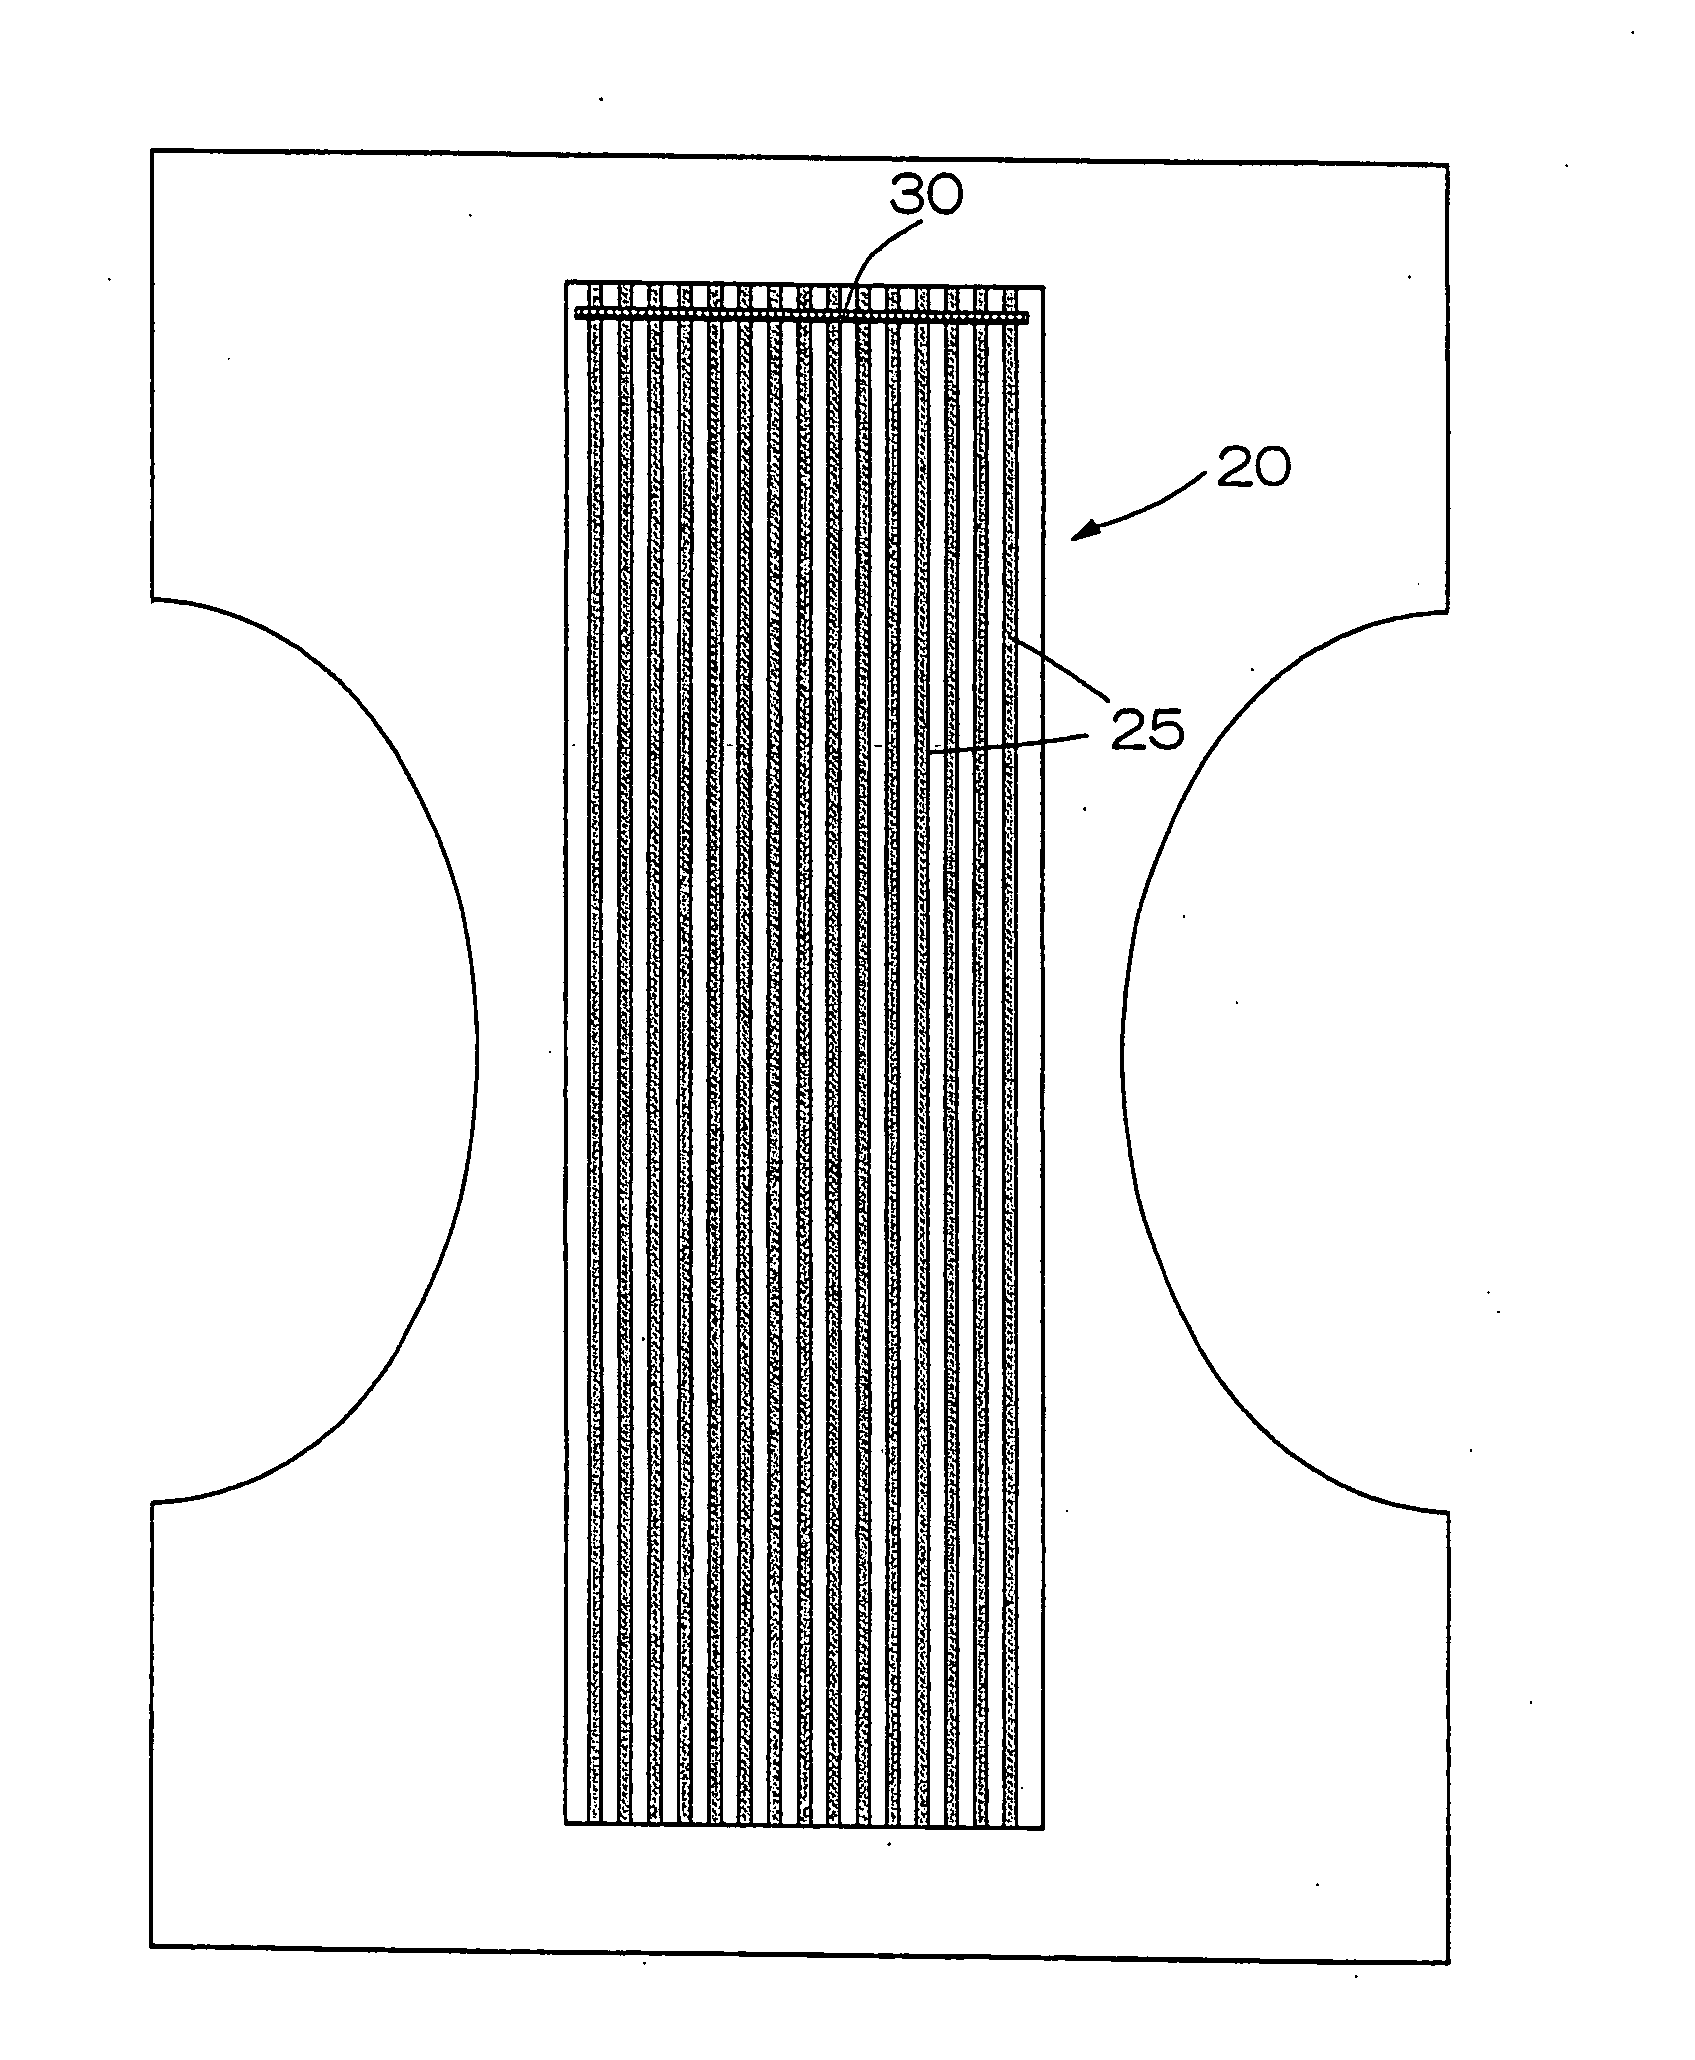 Body fluid absorbing article and method of manufacturing the article